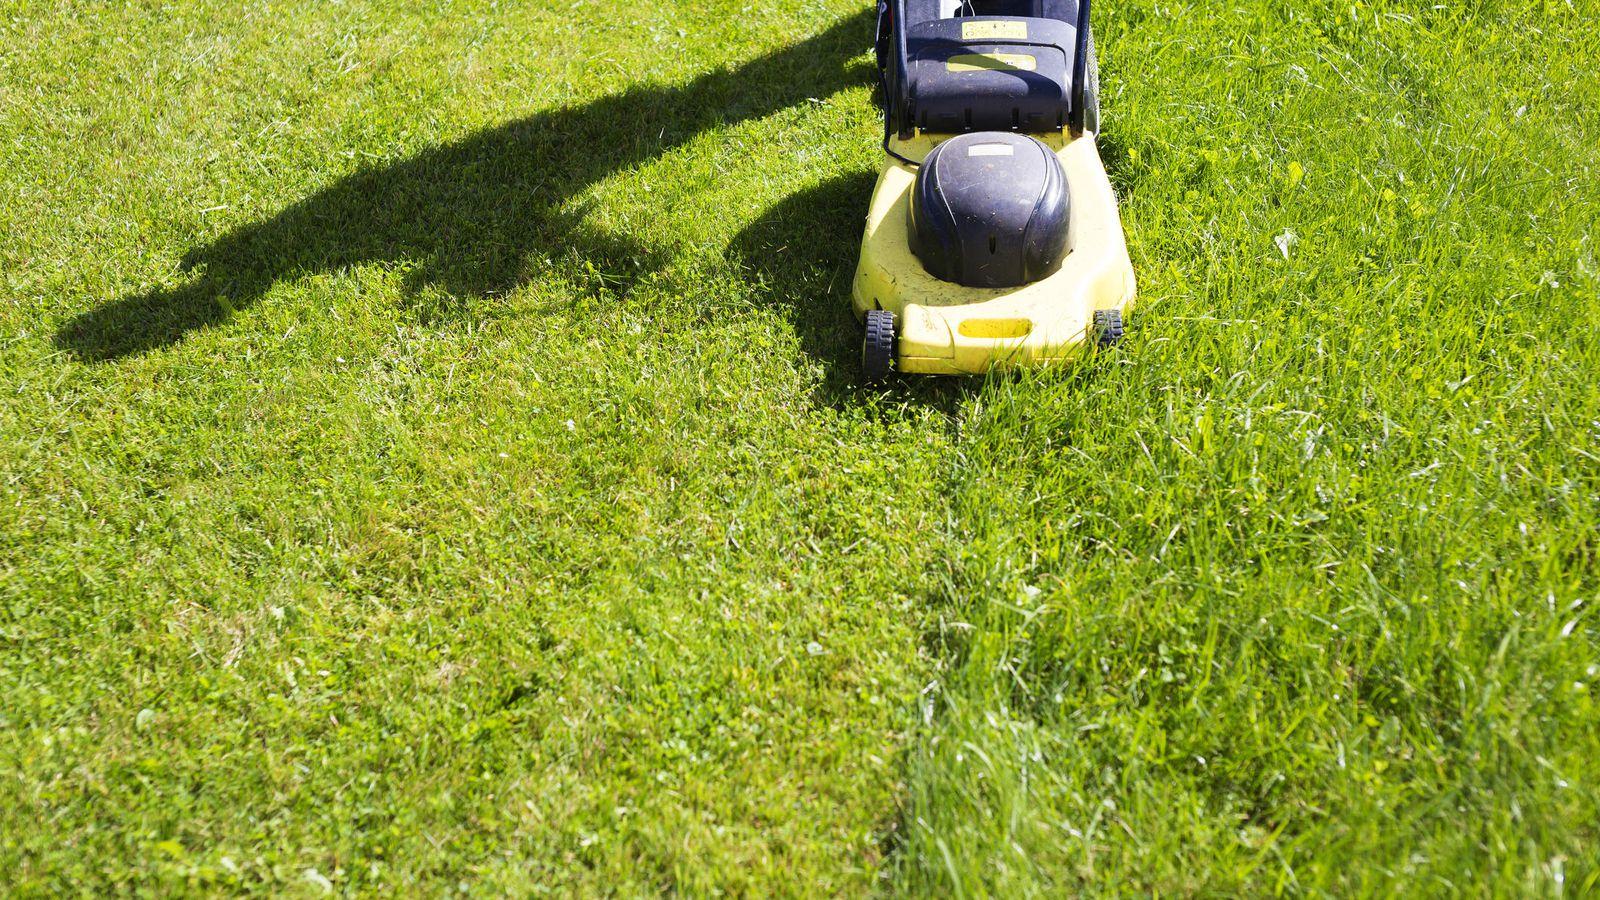 How to mow your lawn the right way